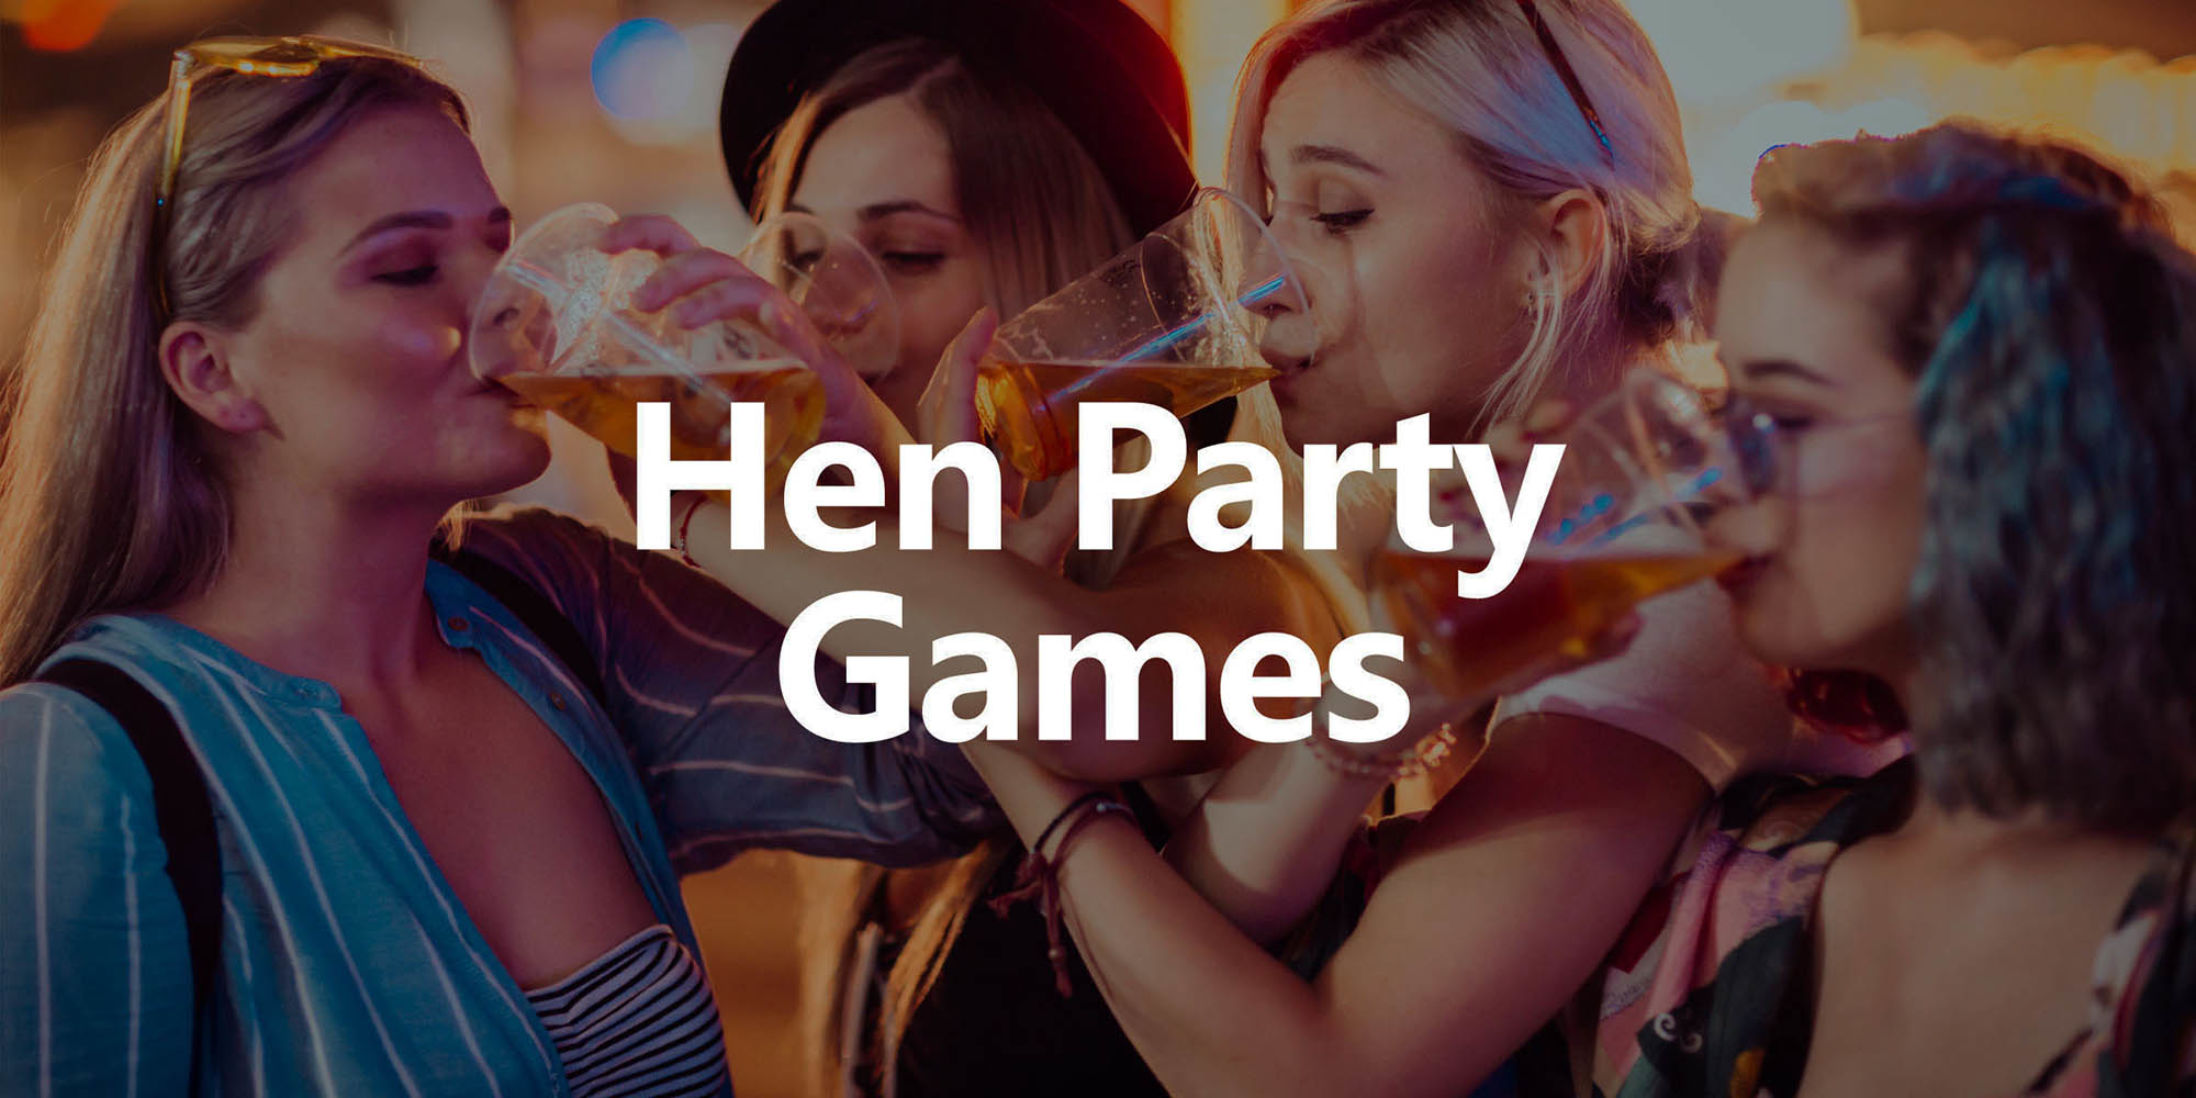 The Best Games for a Hen Party at Home